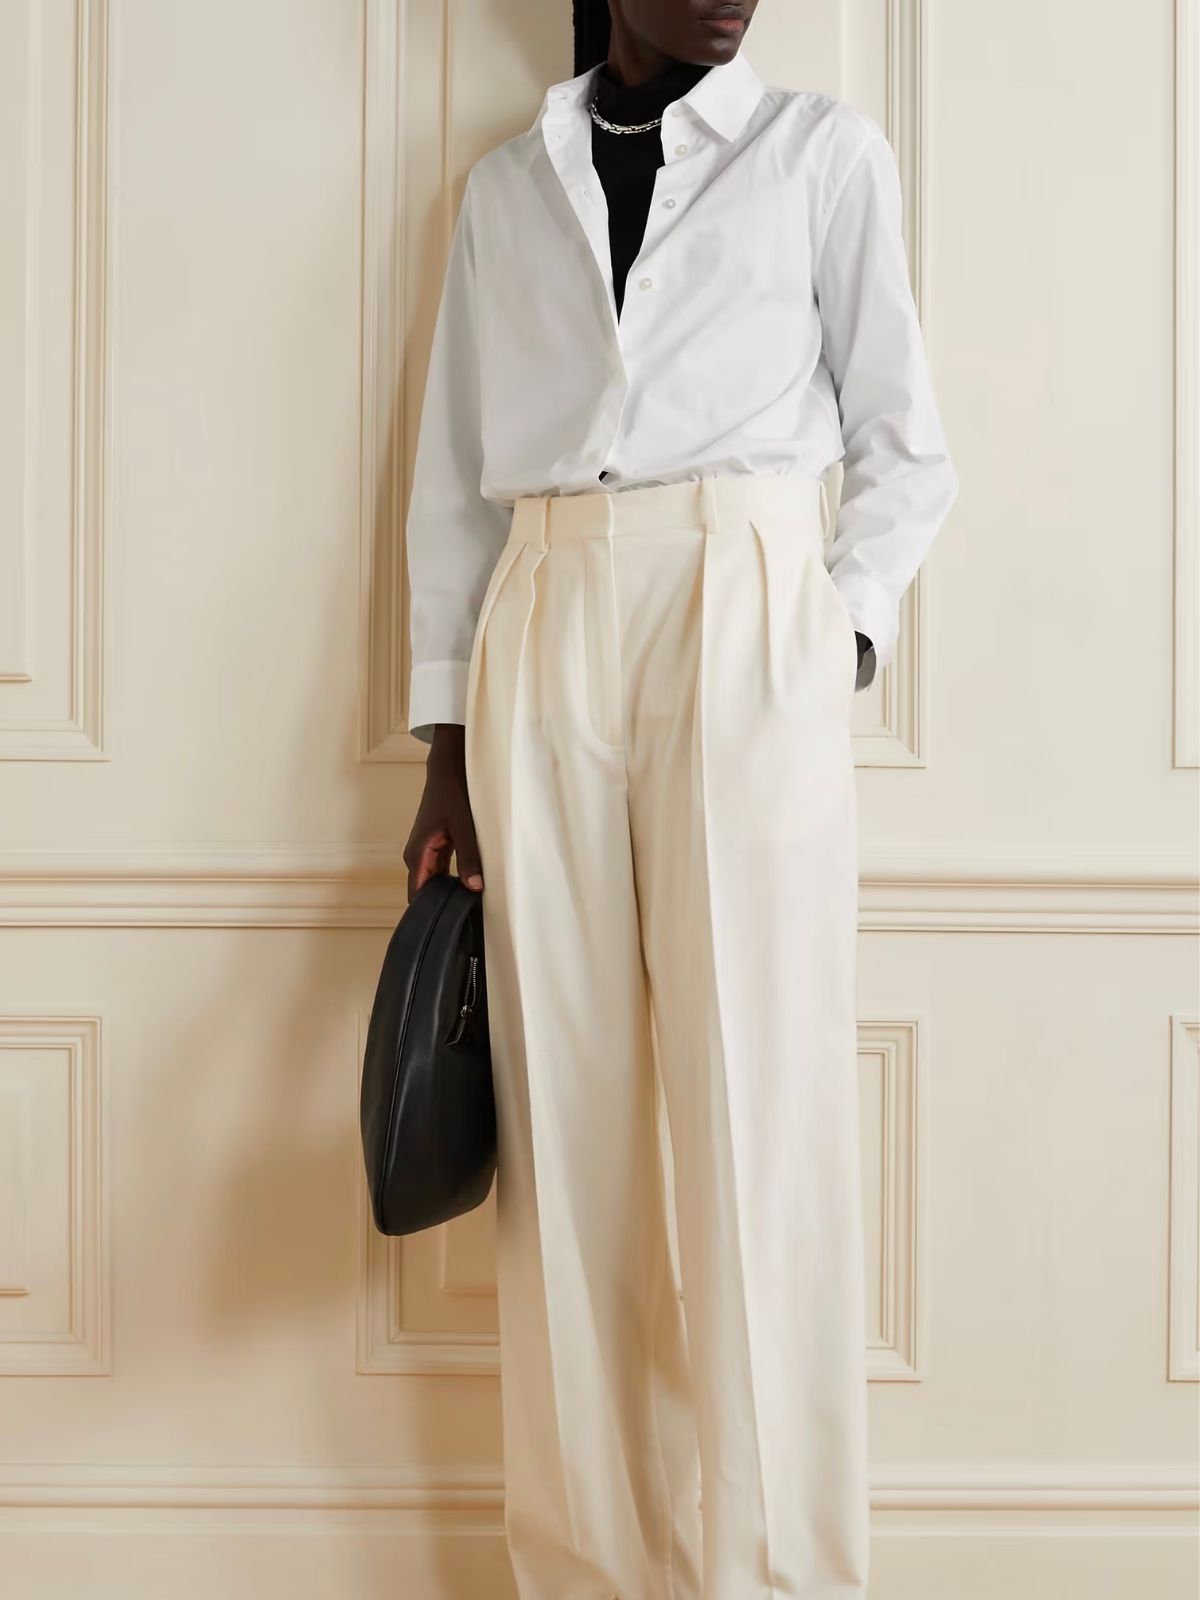 The Enduring Appeal Of The Crisp White Shirt